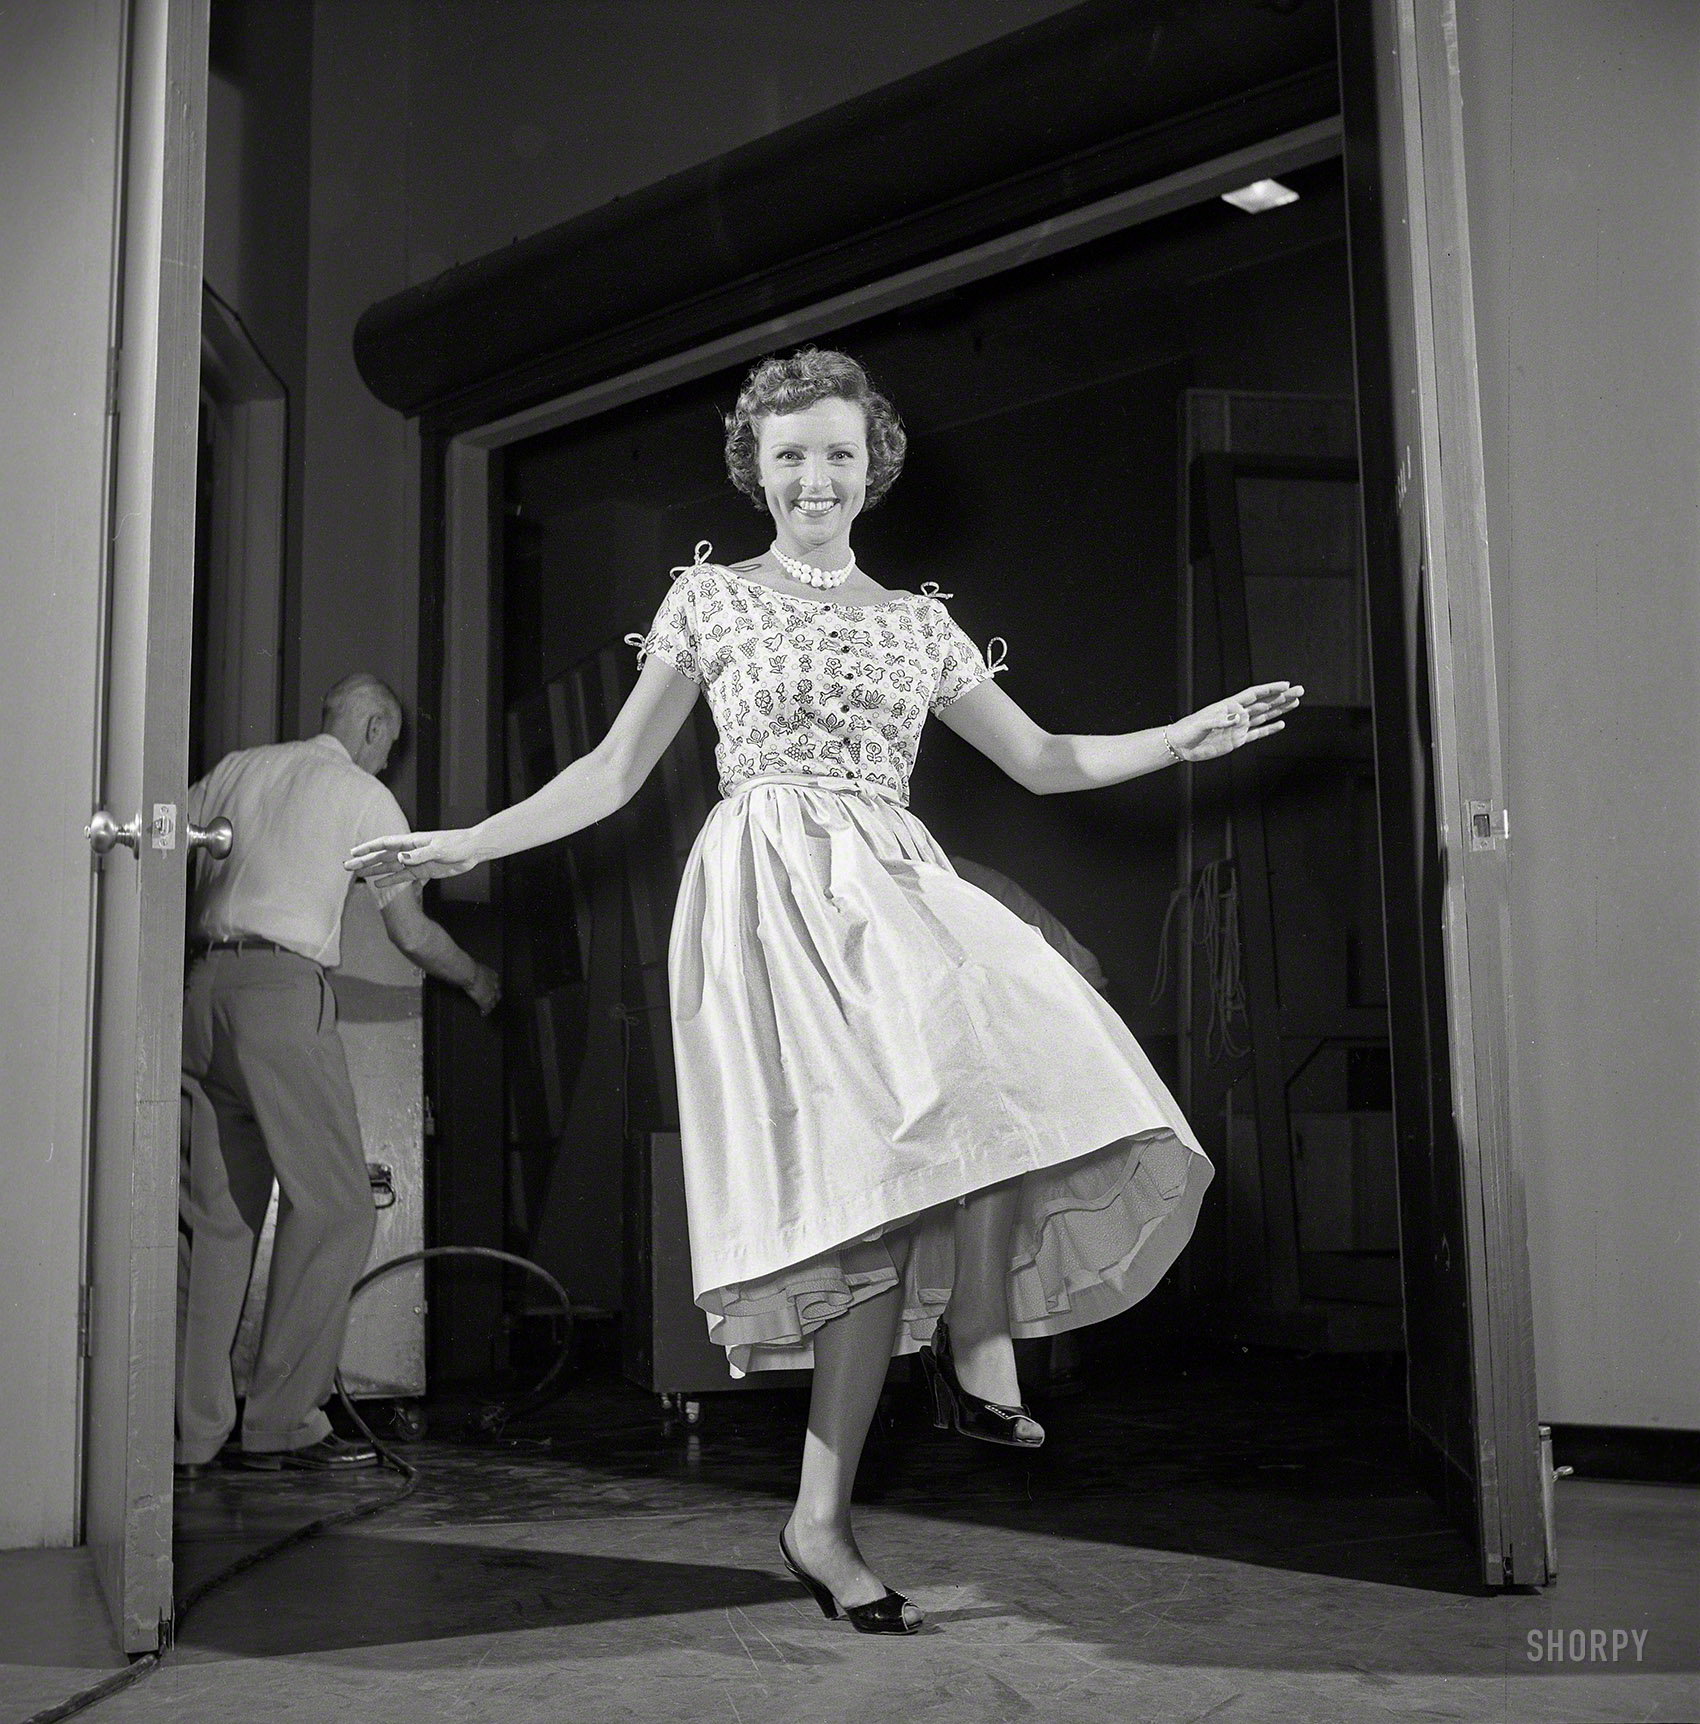 Circa 1954. "Actress Betty White on the set of her local Los Angeles daytime television show." Another look at this ageless entertainer, from unpublished photos by Maurice Terrell and Earl Theisen for Look magazine. View full size.